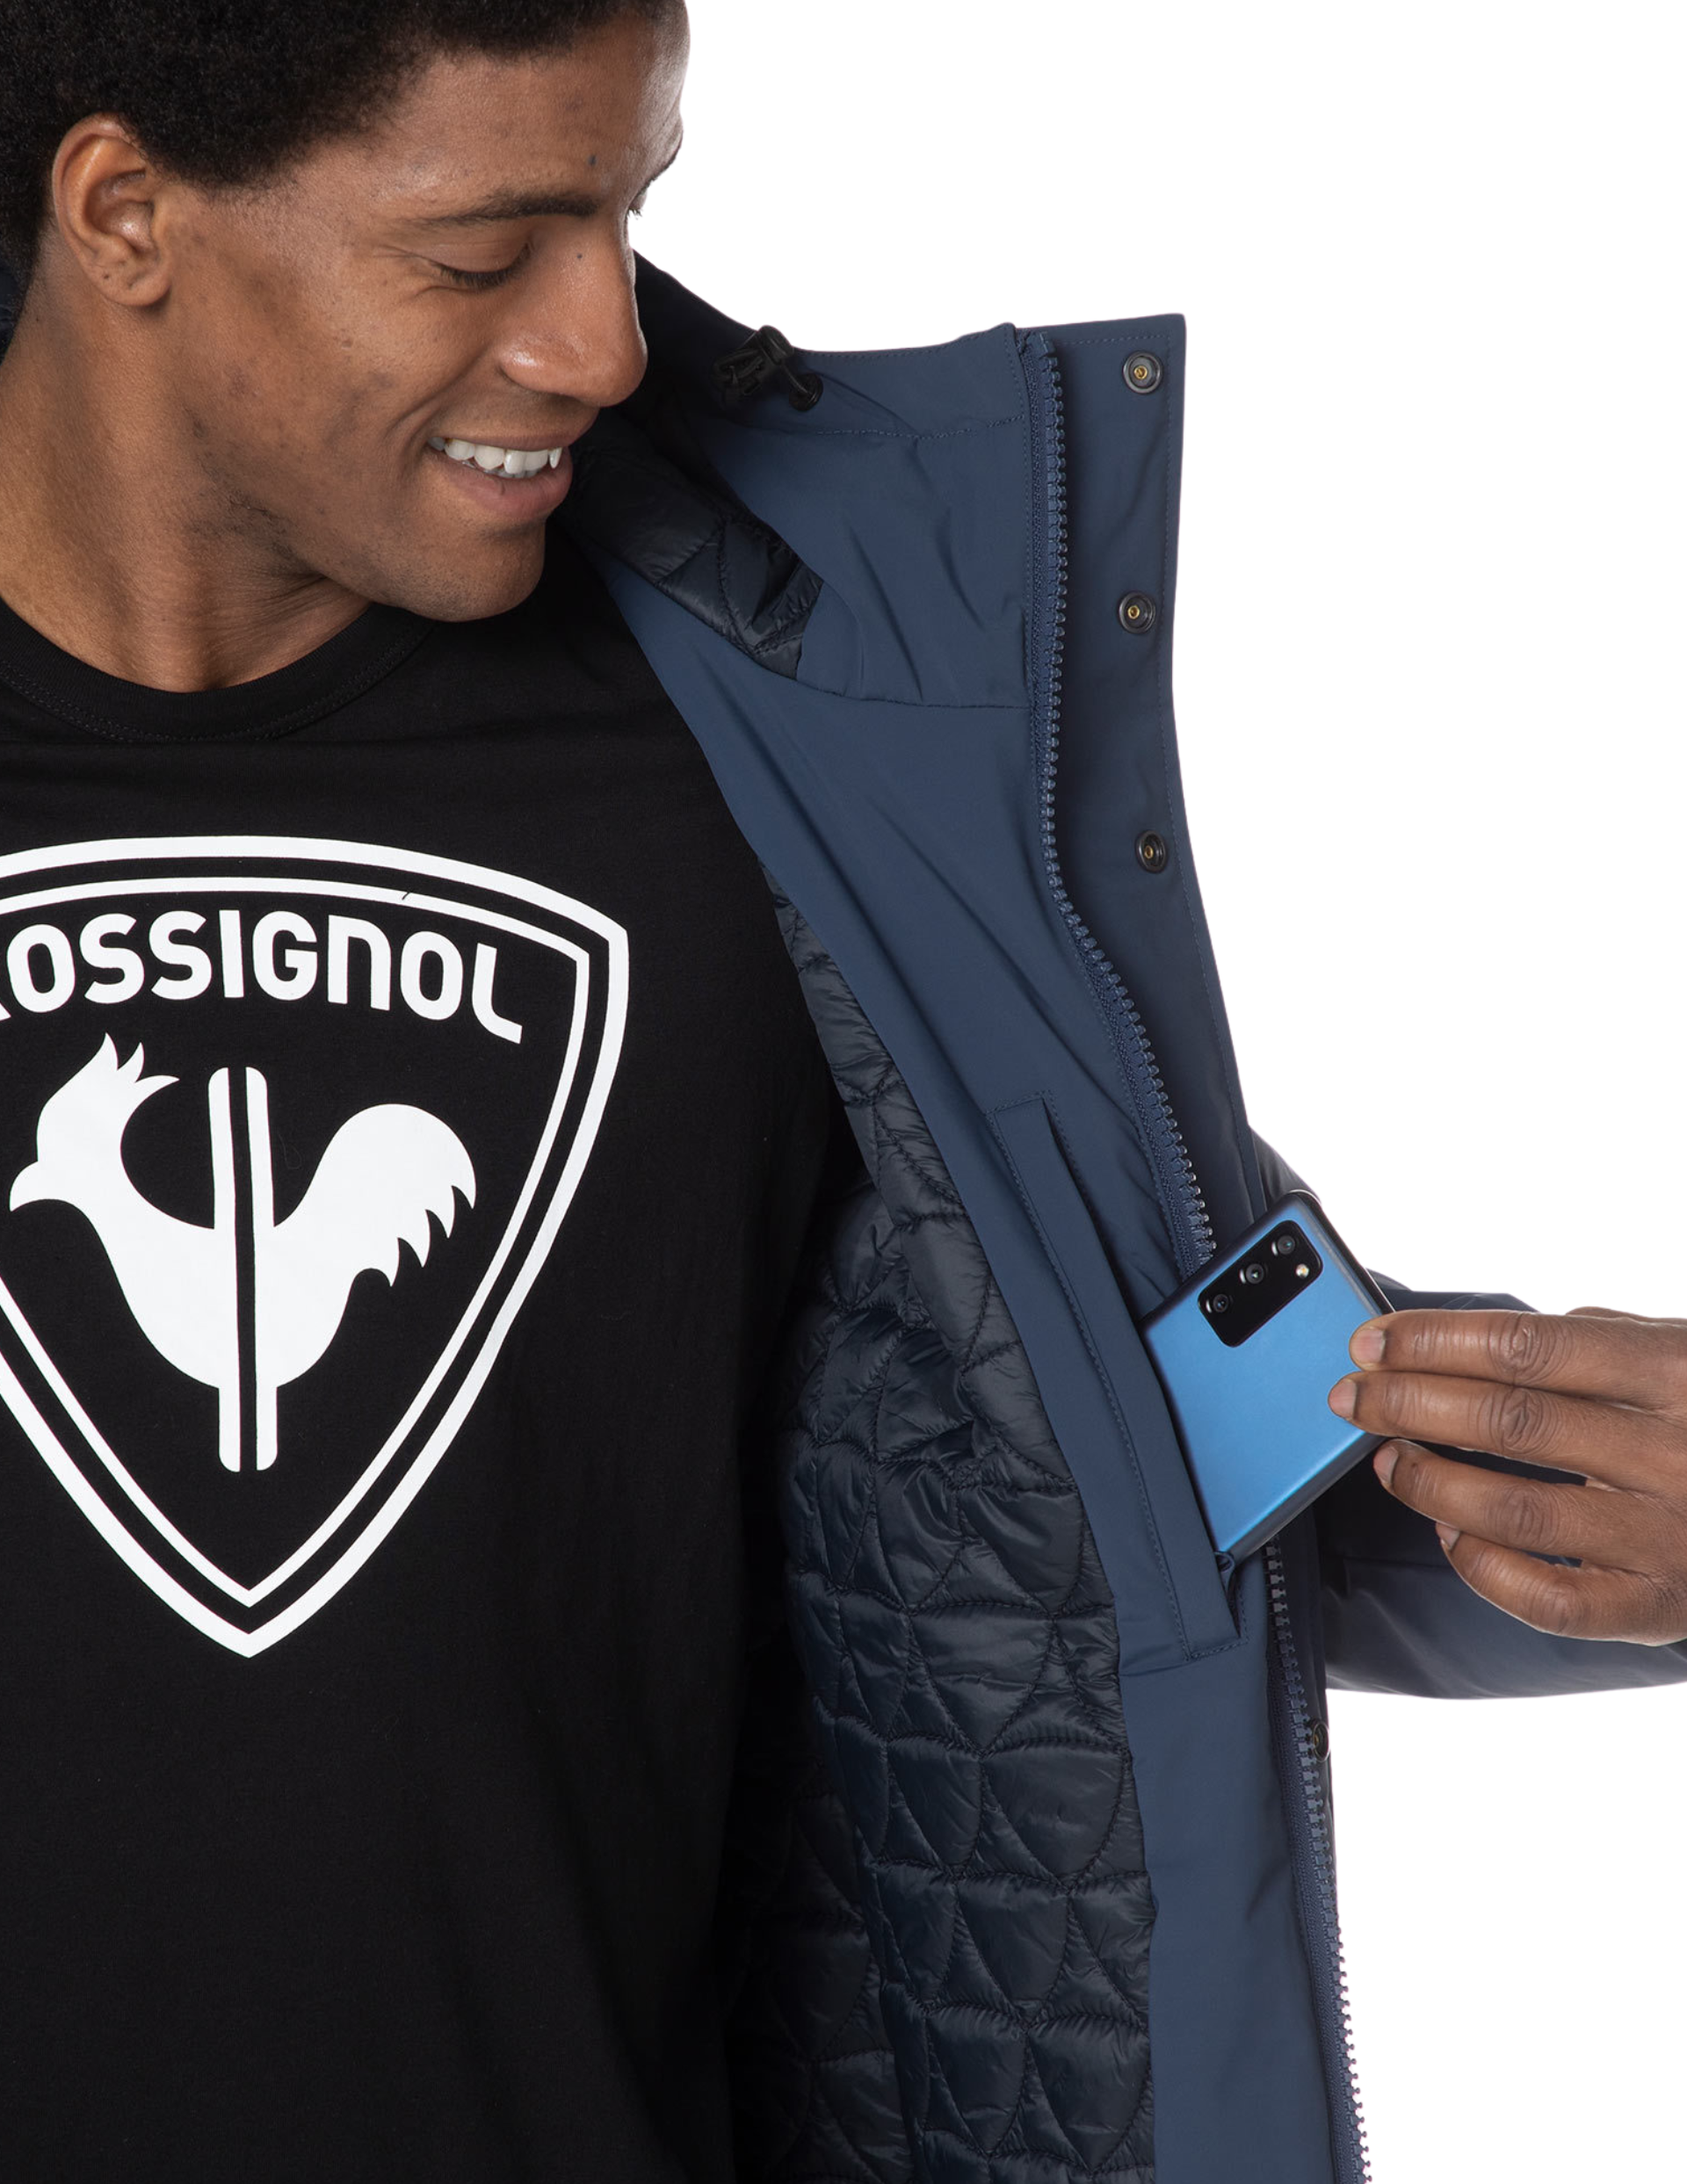 Parka Imperméable Rossignol Stretch Homme